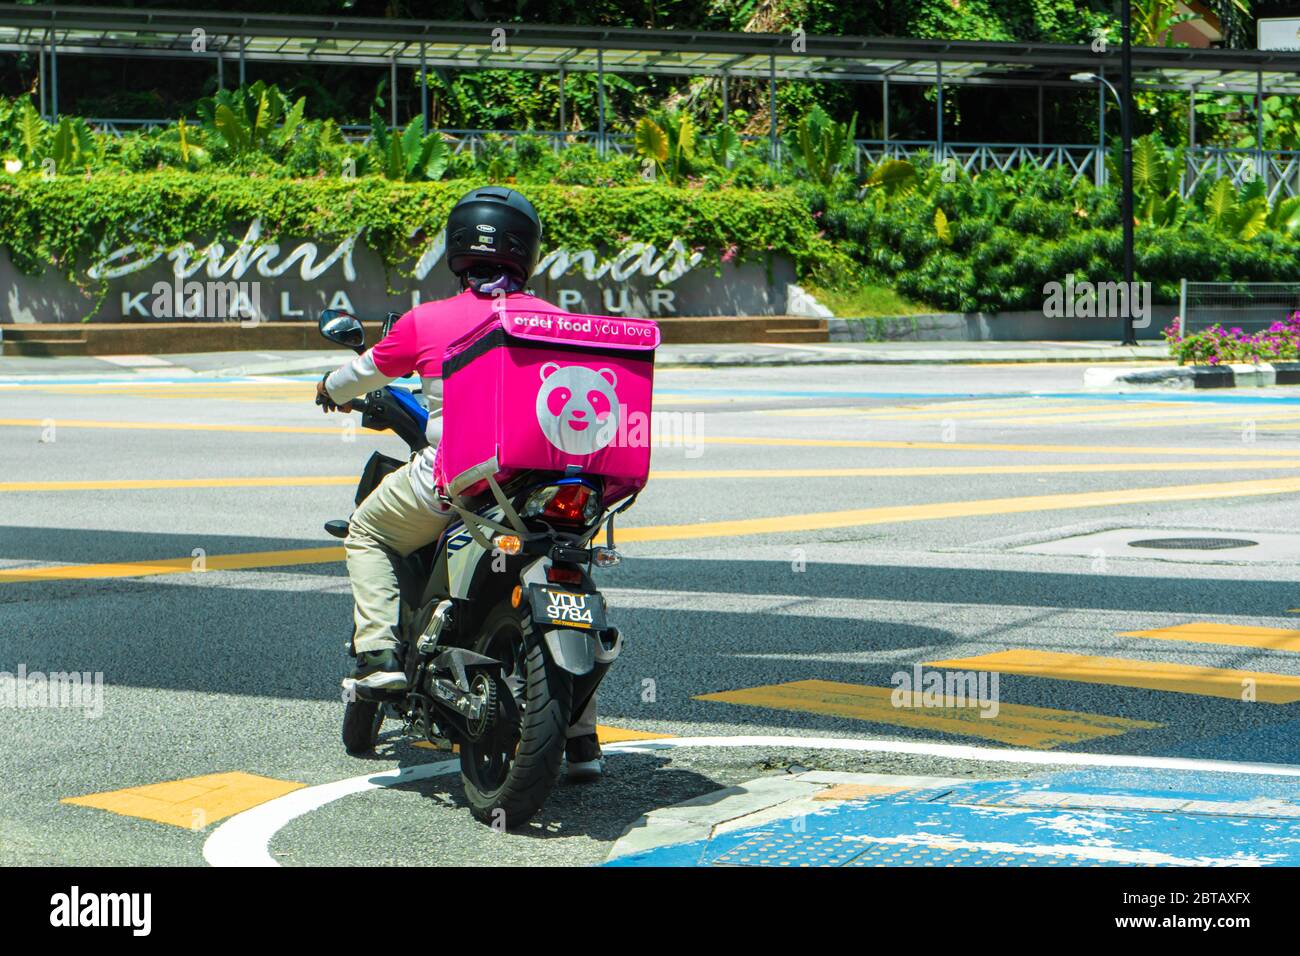 Courier Of A Popular Food Delivery Service In Malaysia On A Bike Food Ordering Home Stock Photo Alamy